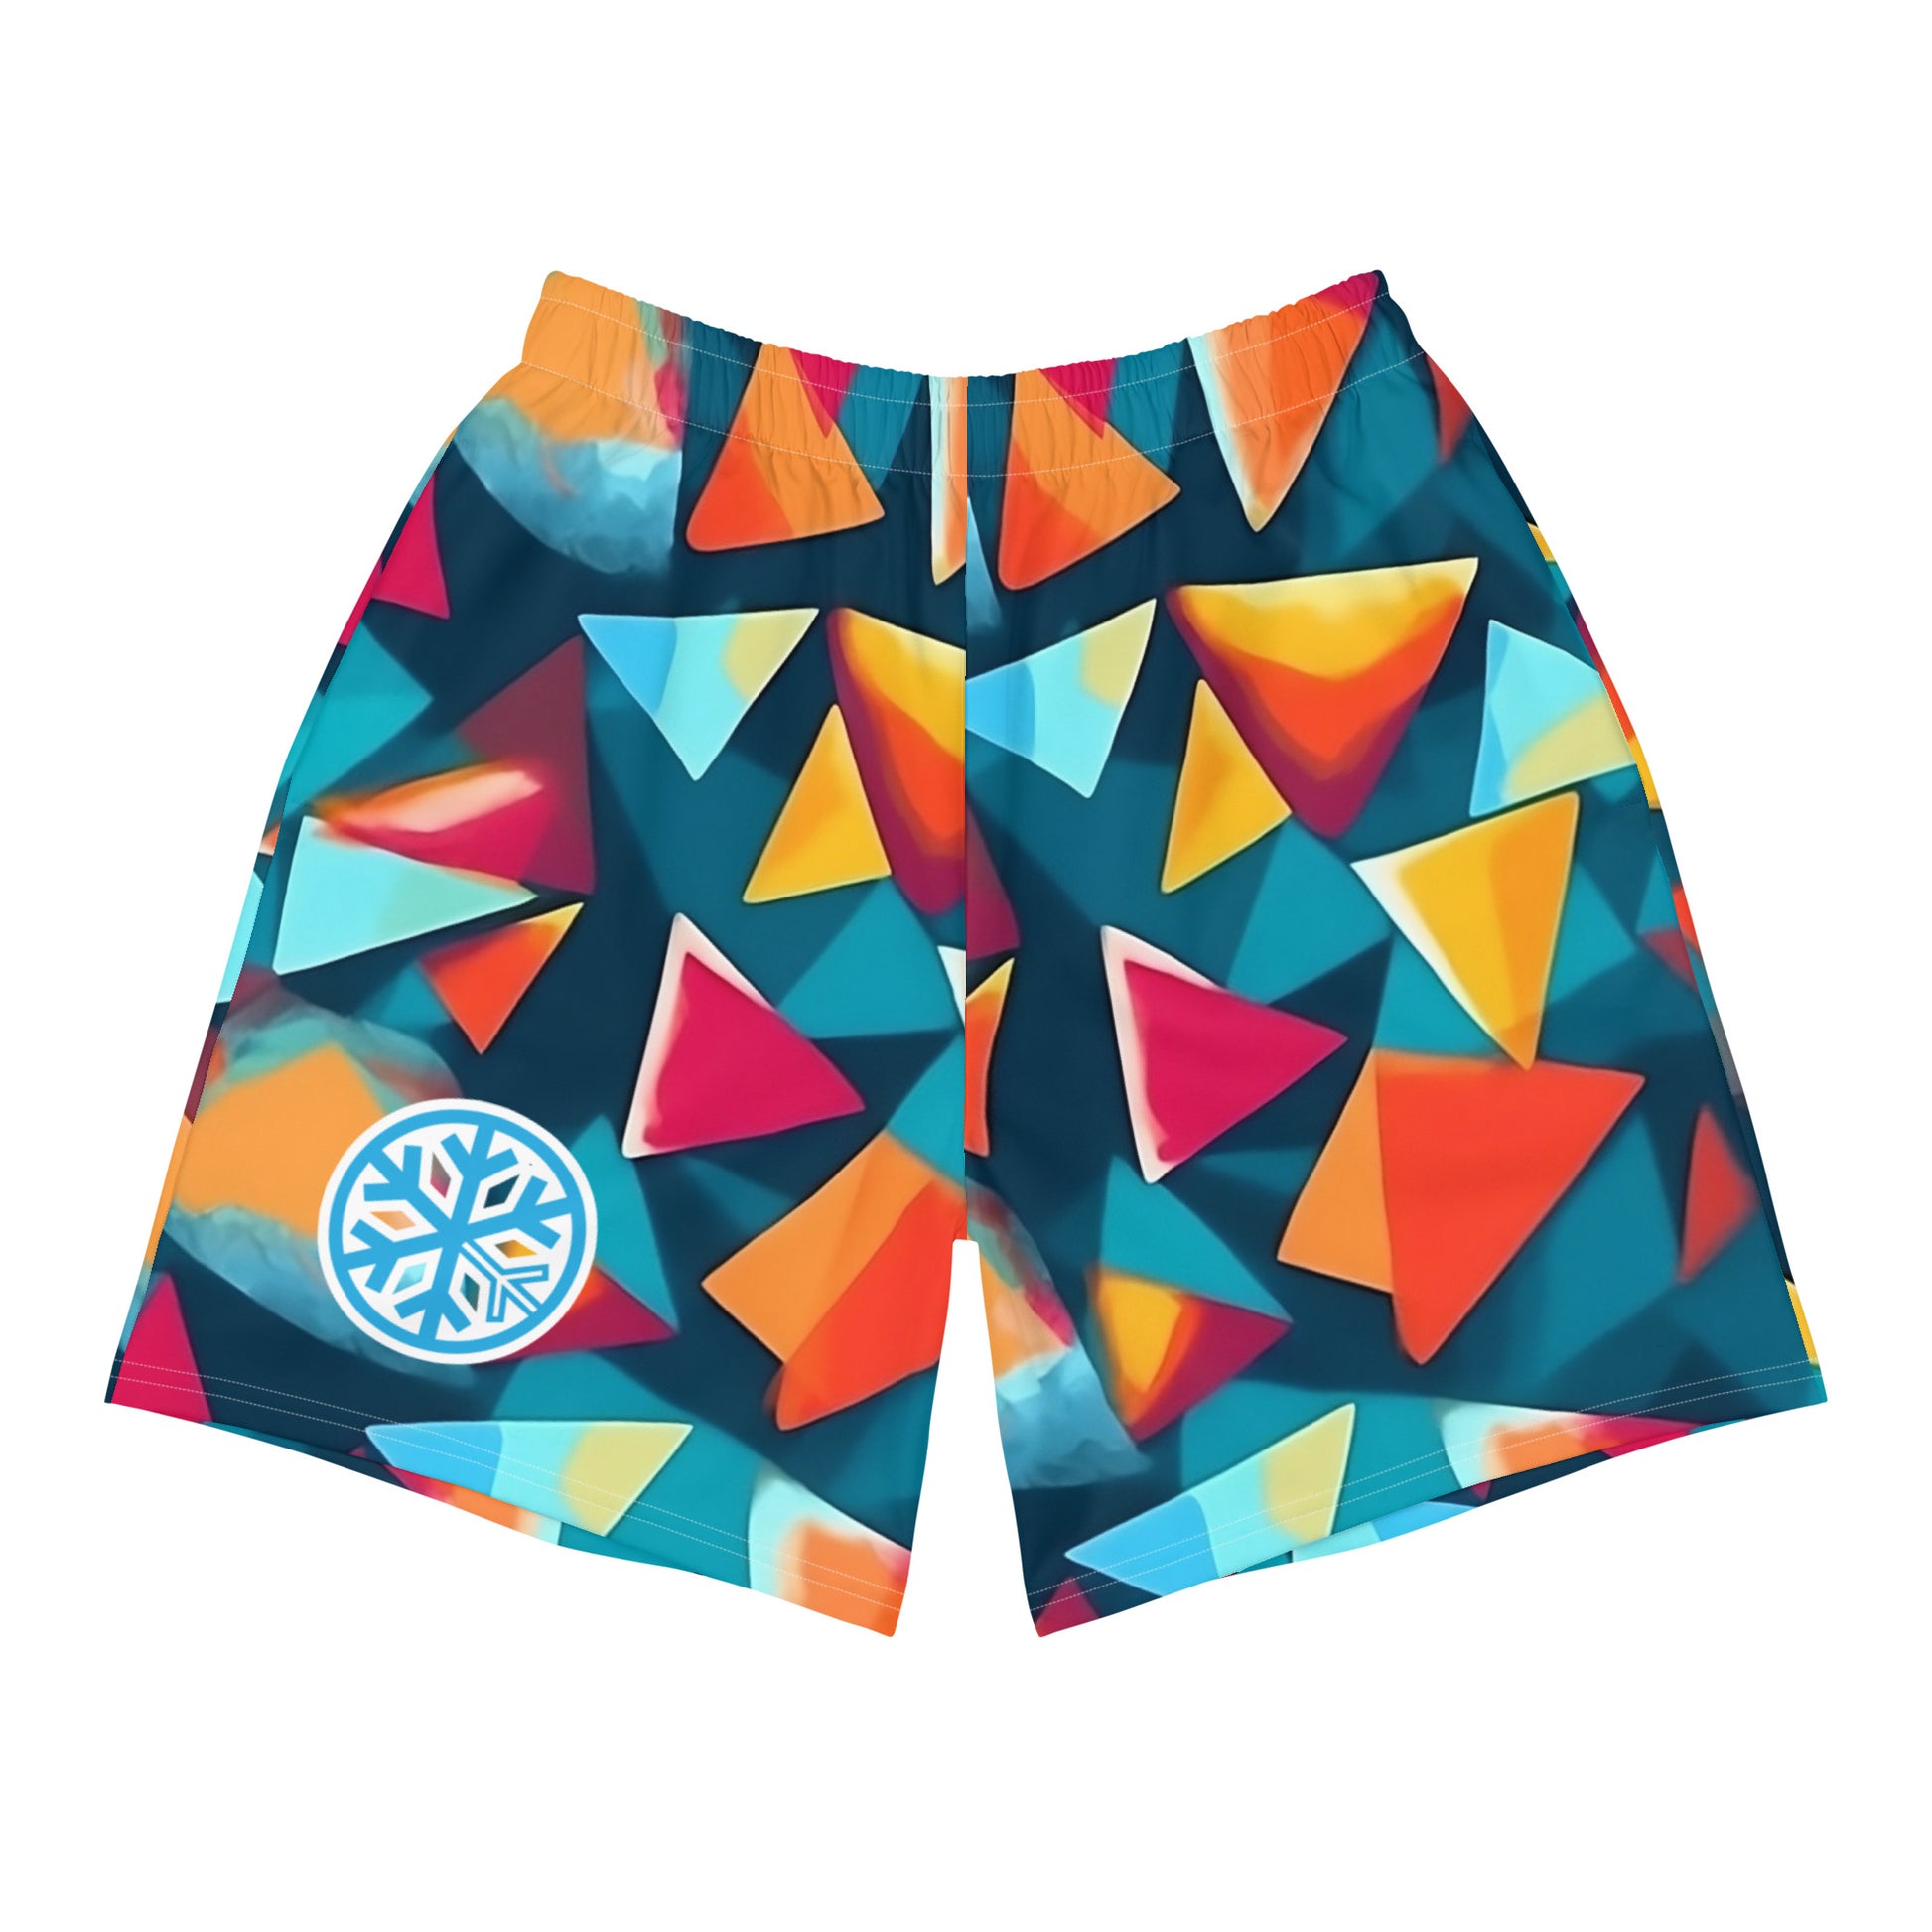 front of pyramid shorts by B.Different Clothing independent streetwear inspired by street art graffiti